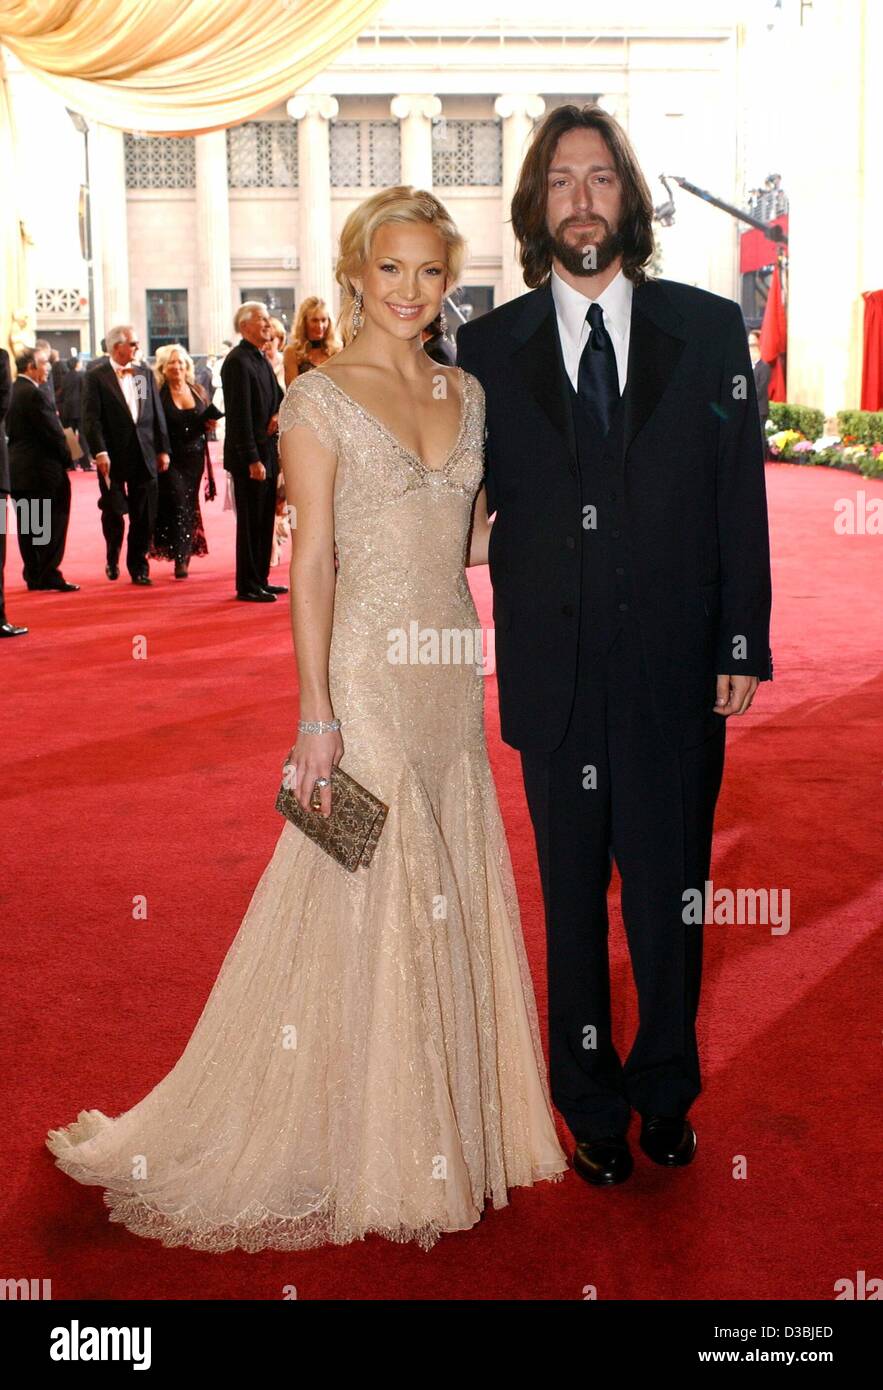 (dpa) - US actress and Goldie Hawn's daughter Kate Hudson ('How to Lose a Guy in 10 Days', 'Almost Famous', 'About Adam') poses for a picture on the red carpet with musician Chris Robinson at the 75th Oscar Award Ceremony in Hollywood, 23 March 2003. Stock Photo